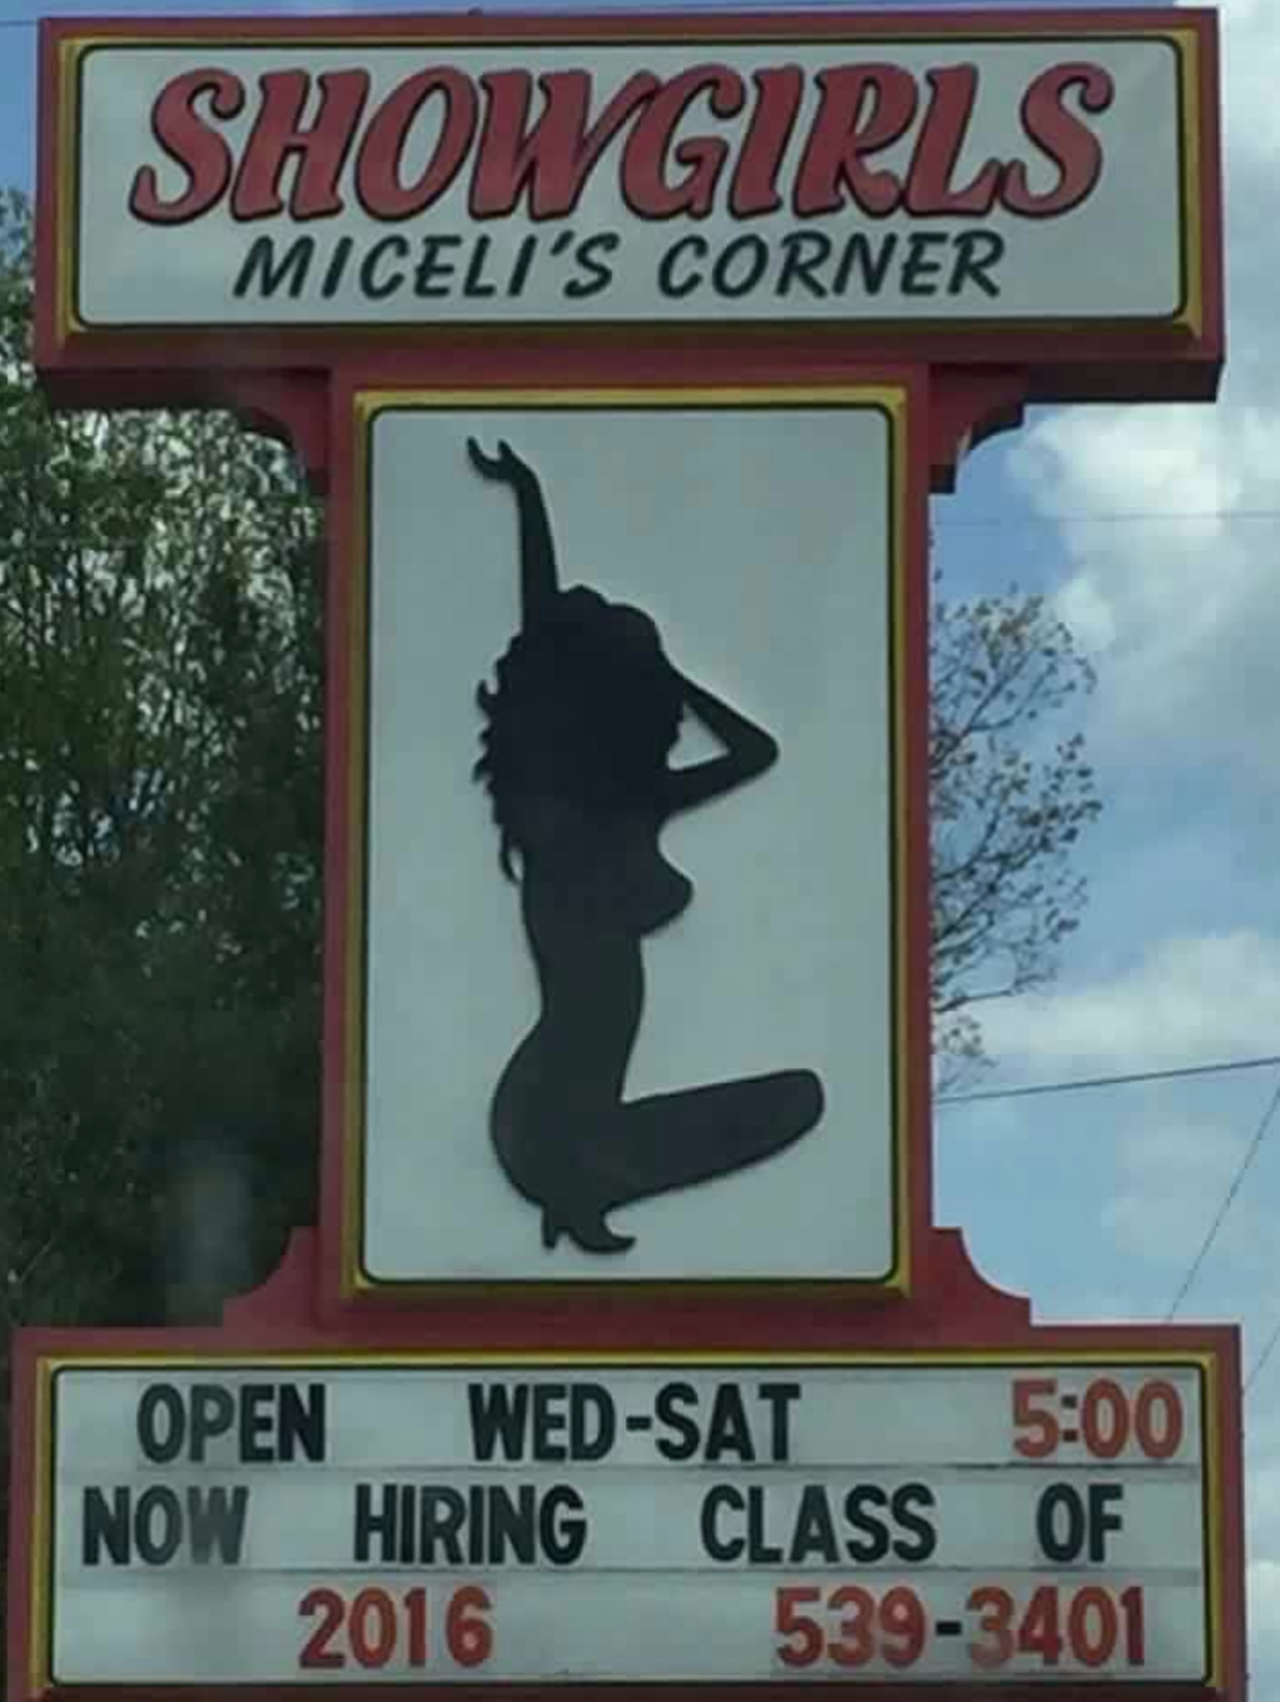 That's not how you get a bachelor's degree
Speaking of free speech, just because you can say something doesn't always mean you should. In May, Harrison strip club Miceli's Corner updated its street sign to say "Now Hiring Class of 2016," seemingly encouraging graduates of the local high school to apply. Some residents think that was not the right message to be sending to their youths. "Children fresh out of high school shouldn't be taking their clothes off for money," one resident tells Saginaw's WNEM. "In no way were we trying to offend anybody," Miceli's management later told WNEM in a statement. "The sign was simply a joke."